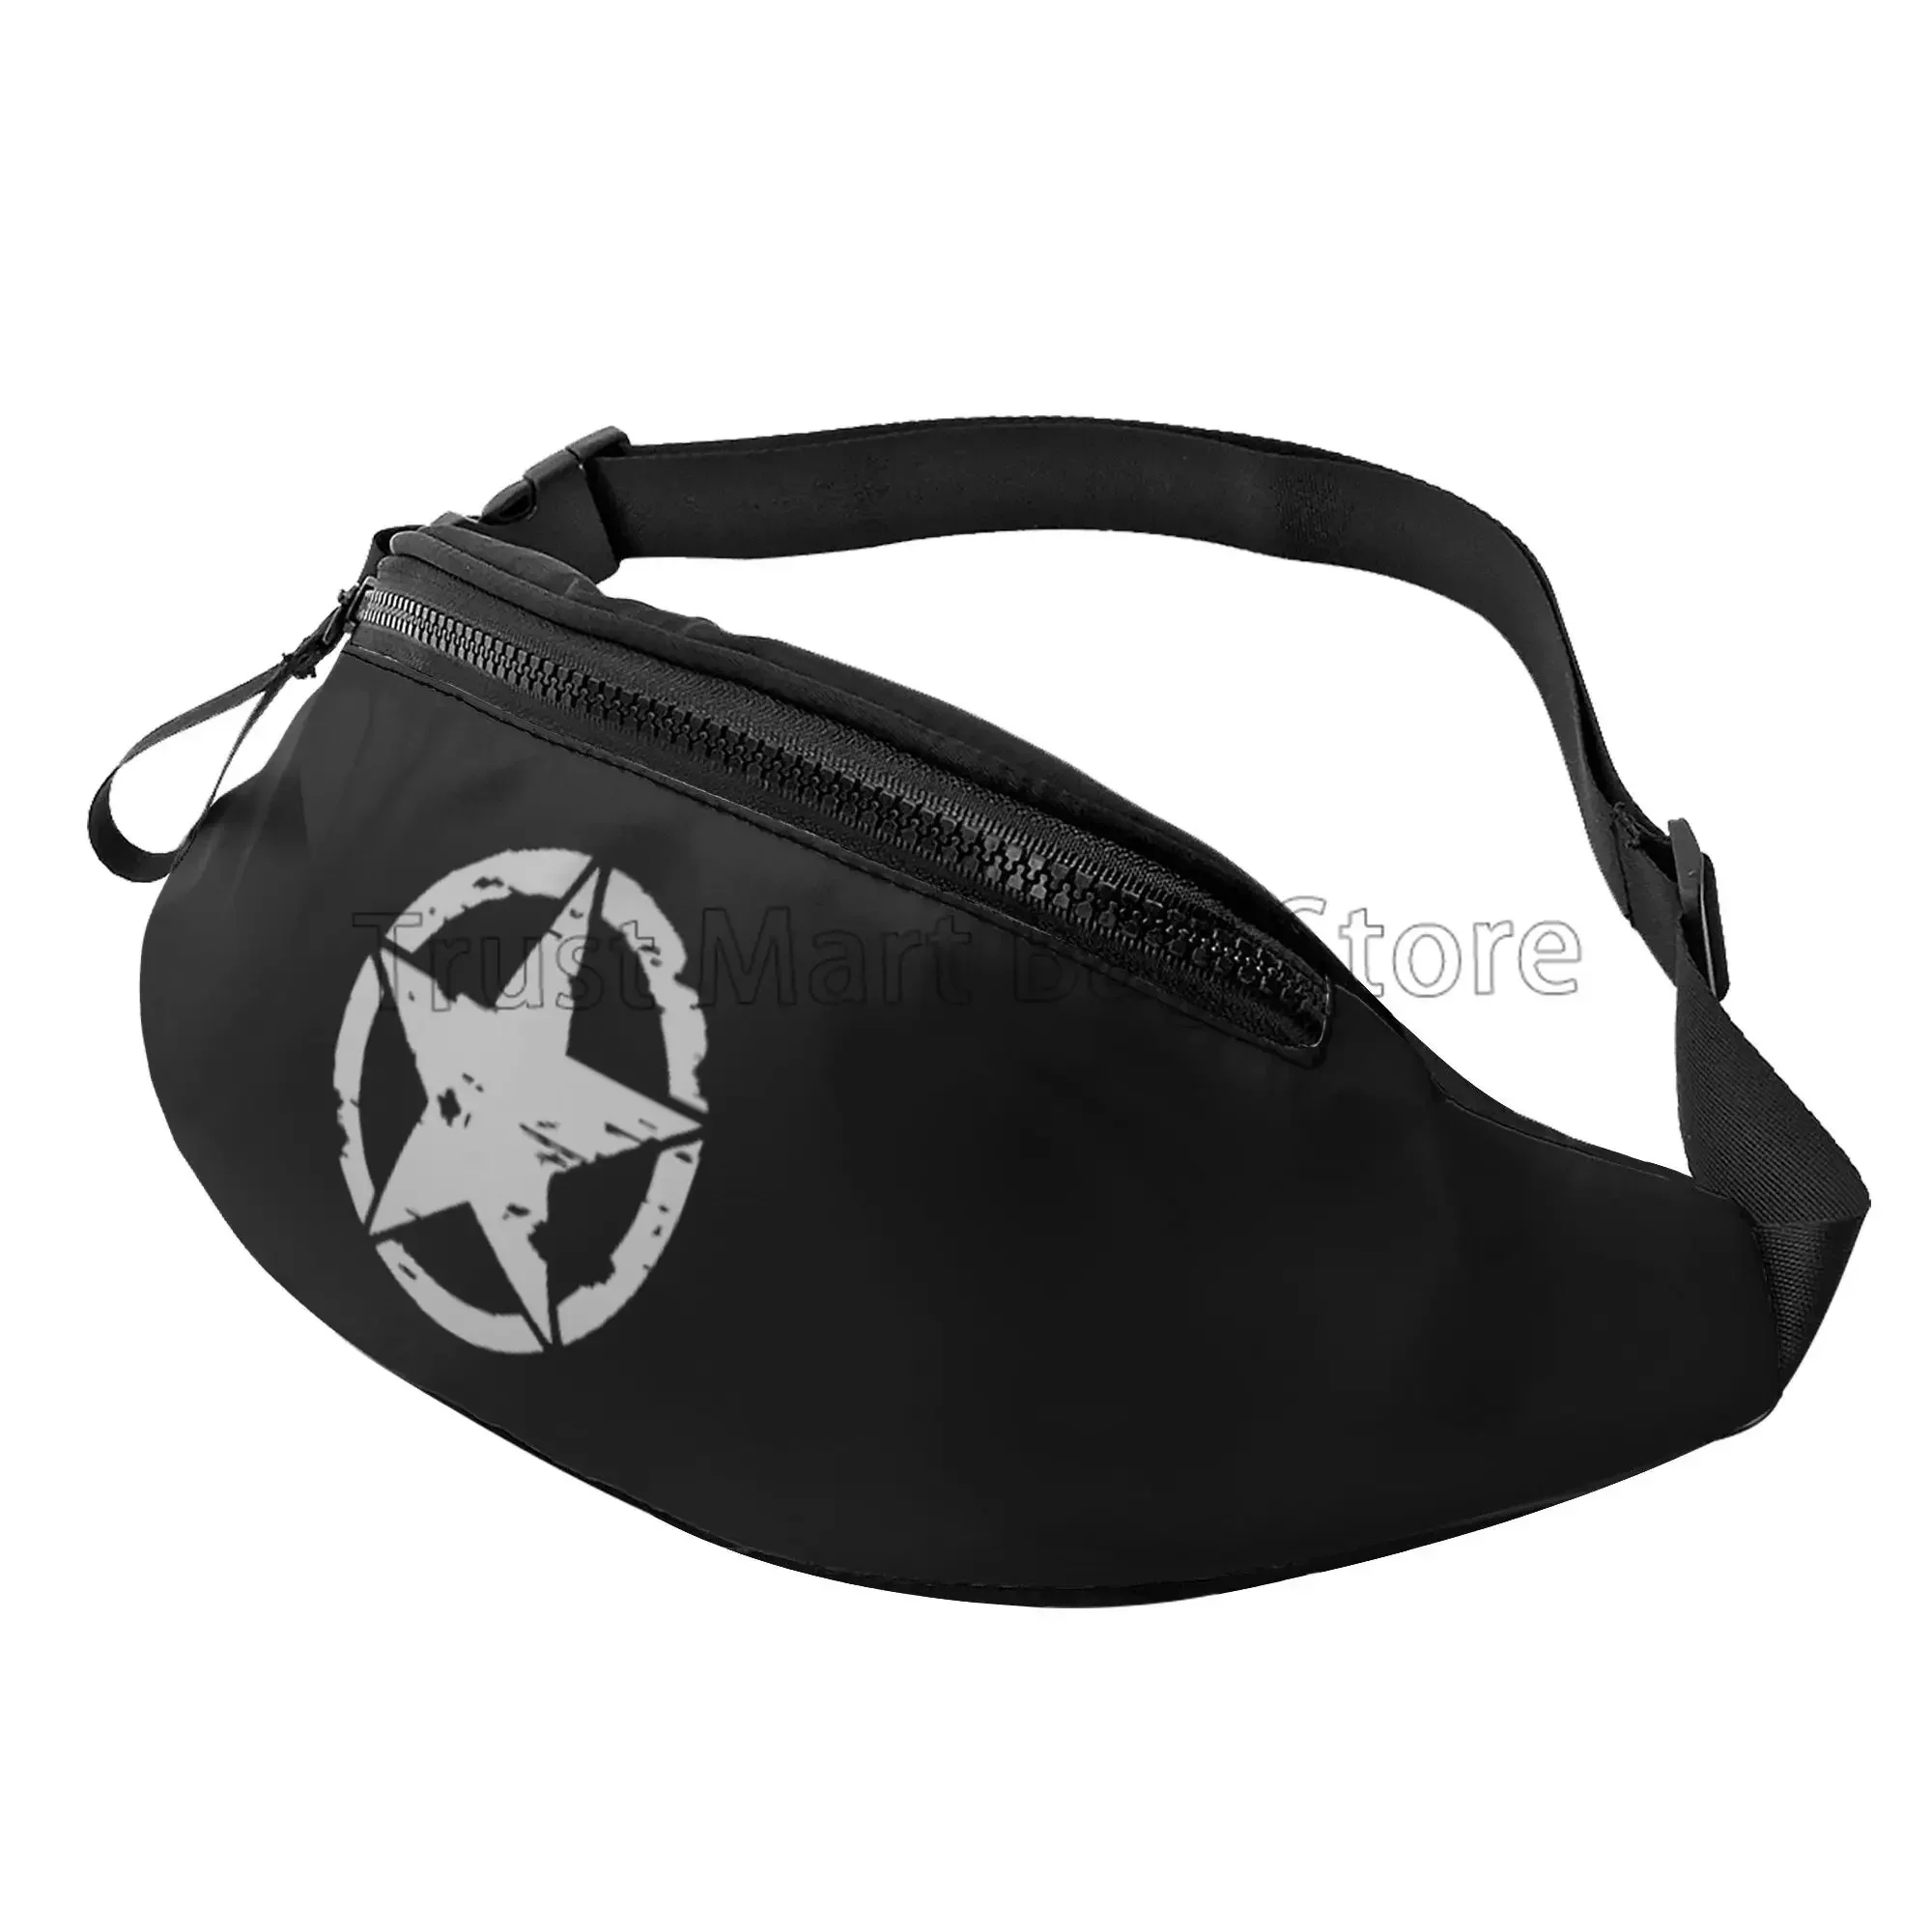 

Military Tactical Star Waist Bag with Headphone Hole Belt Bag Fashion Hip Bum Bag for Outdoor Casual Travelling Hiking Cycling